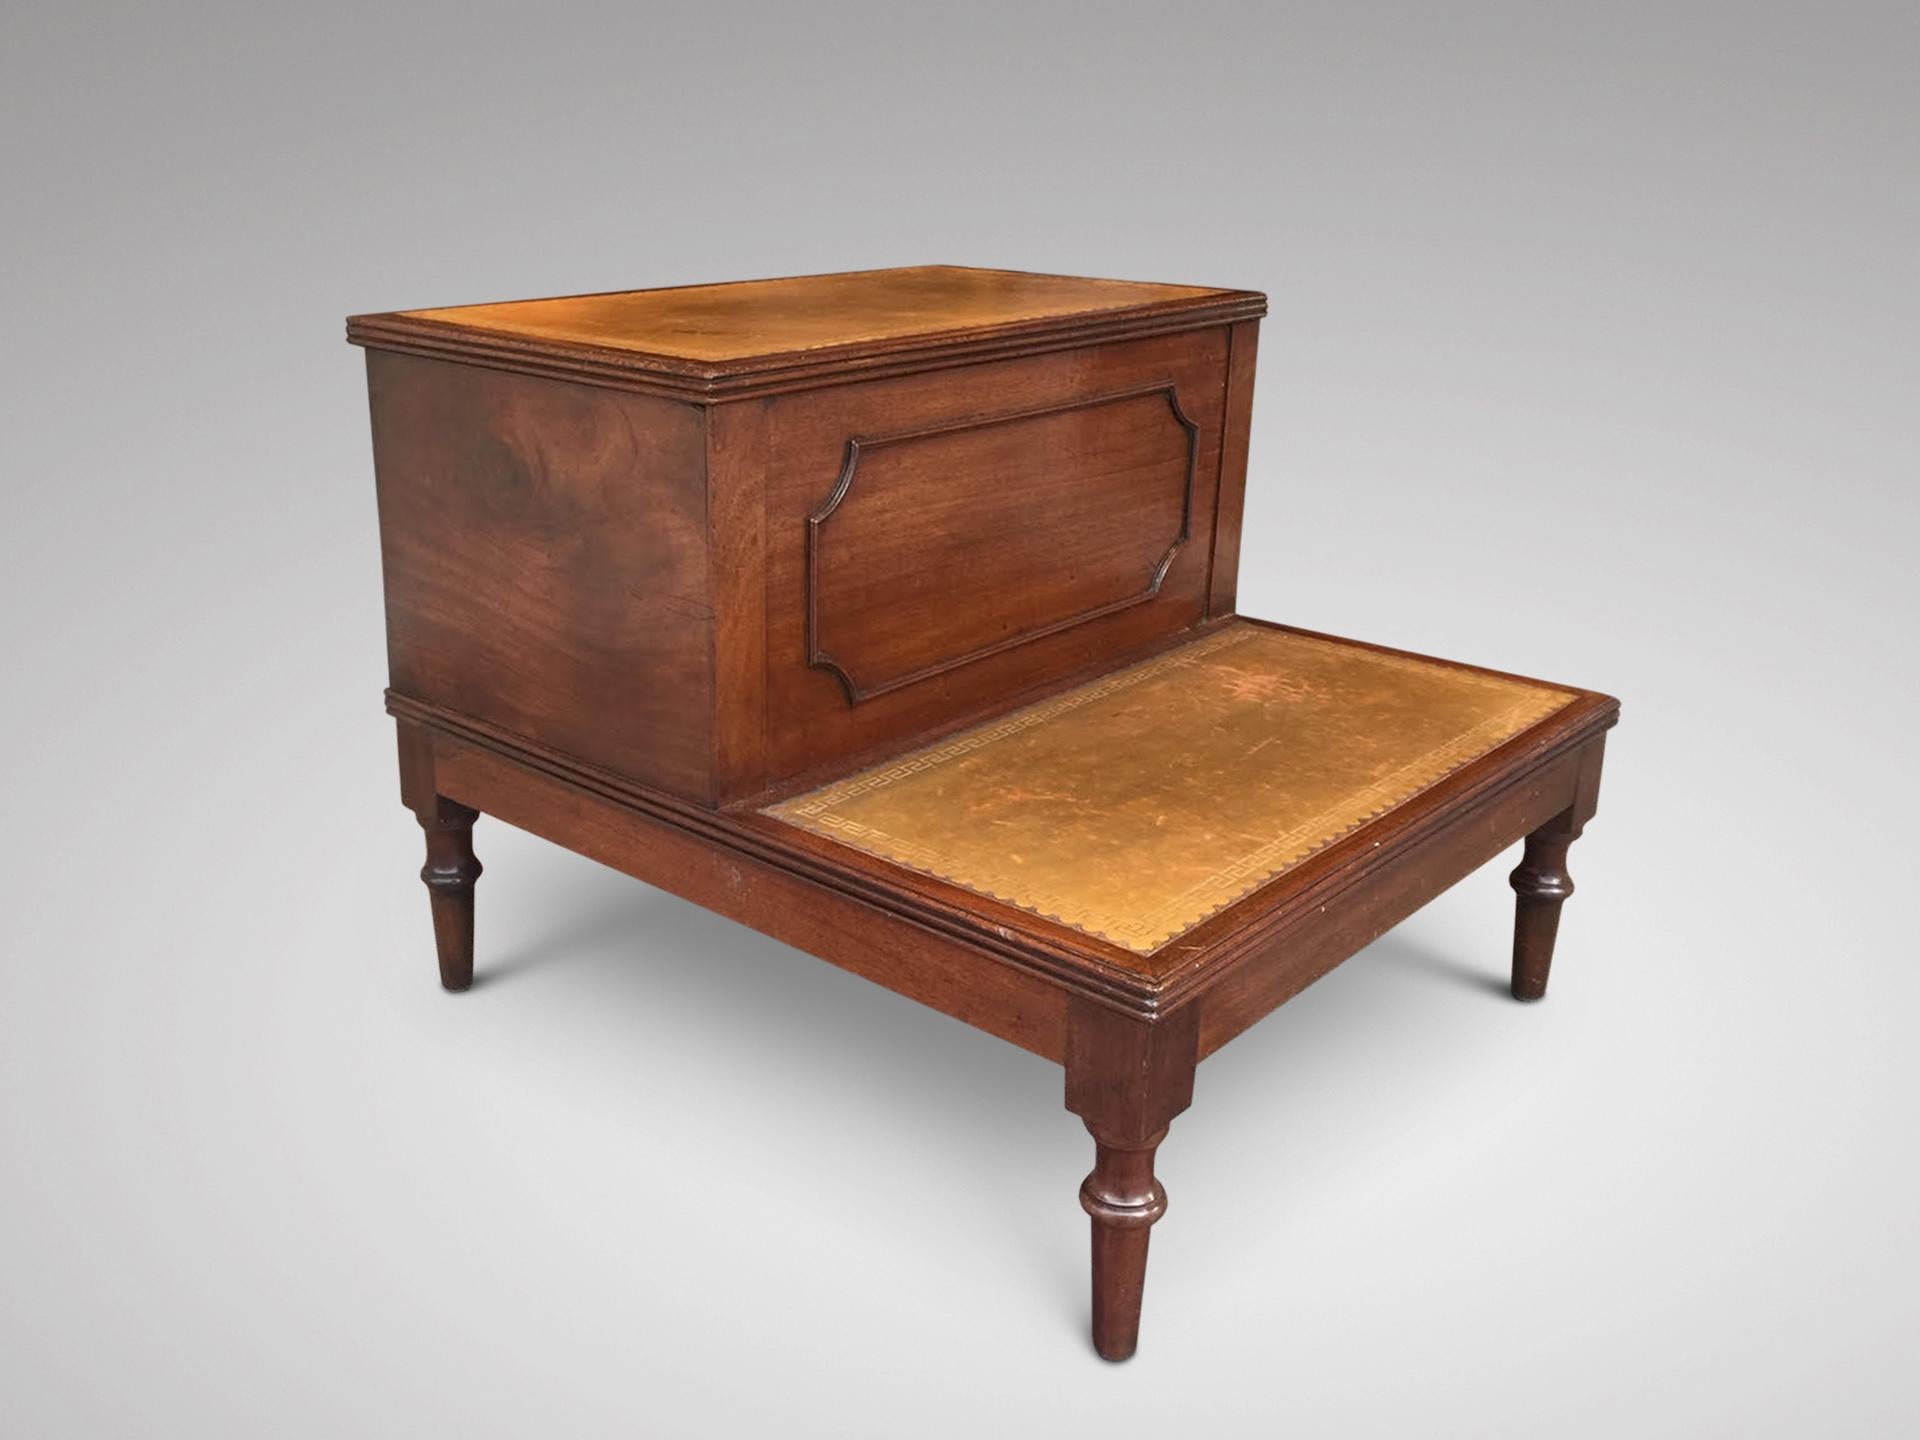 A set of early 19th century, Regency period mahogany and gold brown tooled leather two tier bed steps, standing on turned supports. comprising a small cupboard in top. England circa 1810. Great colour to mahogany and leather and lovely patina